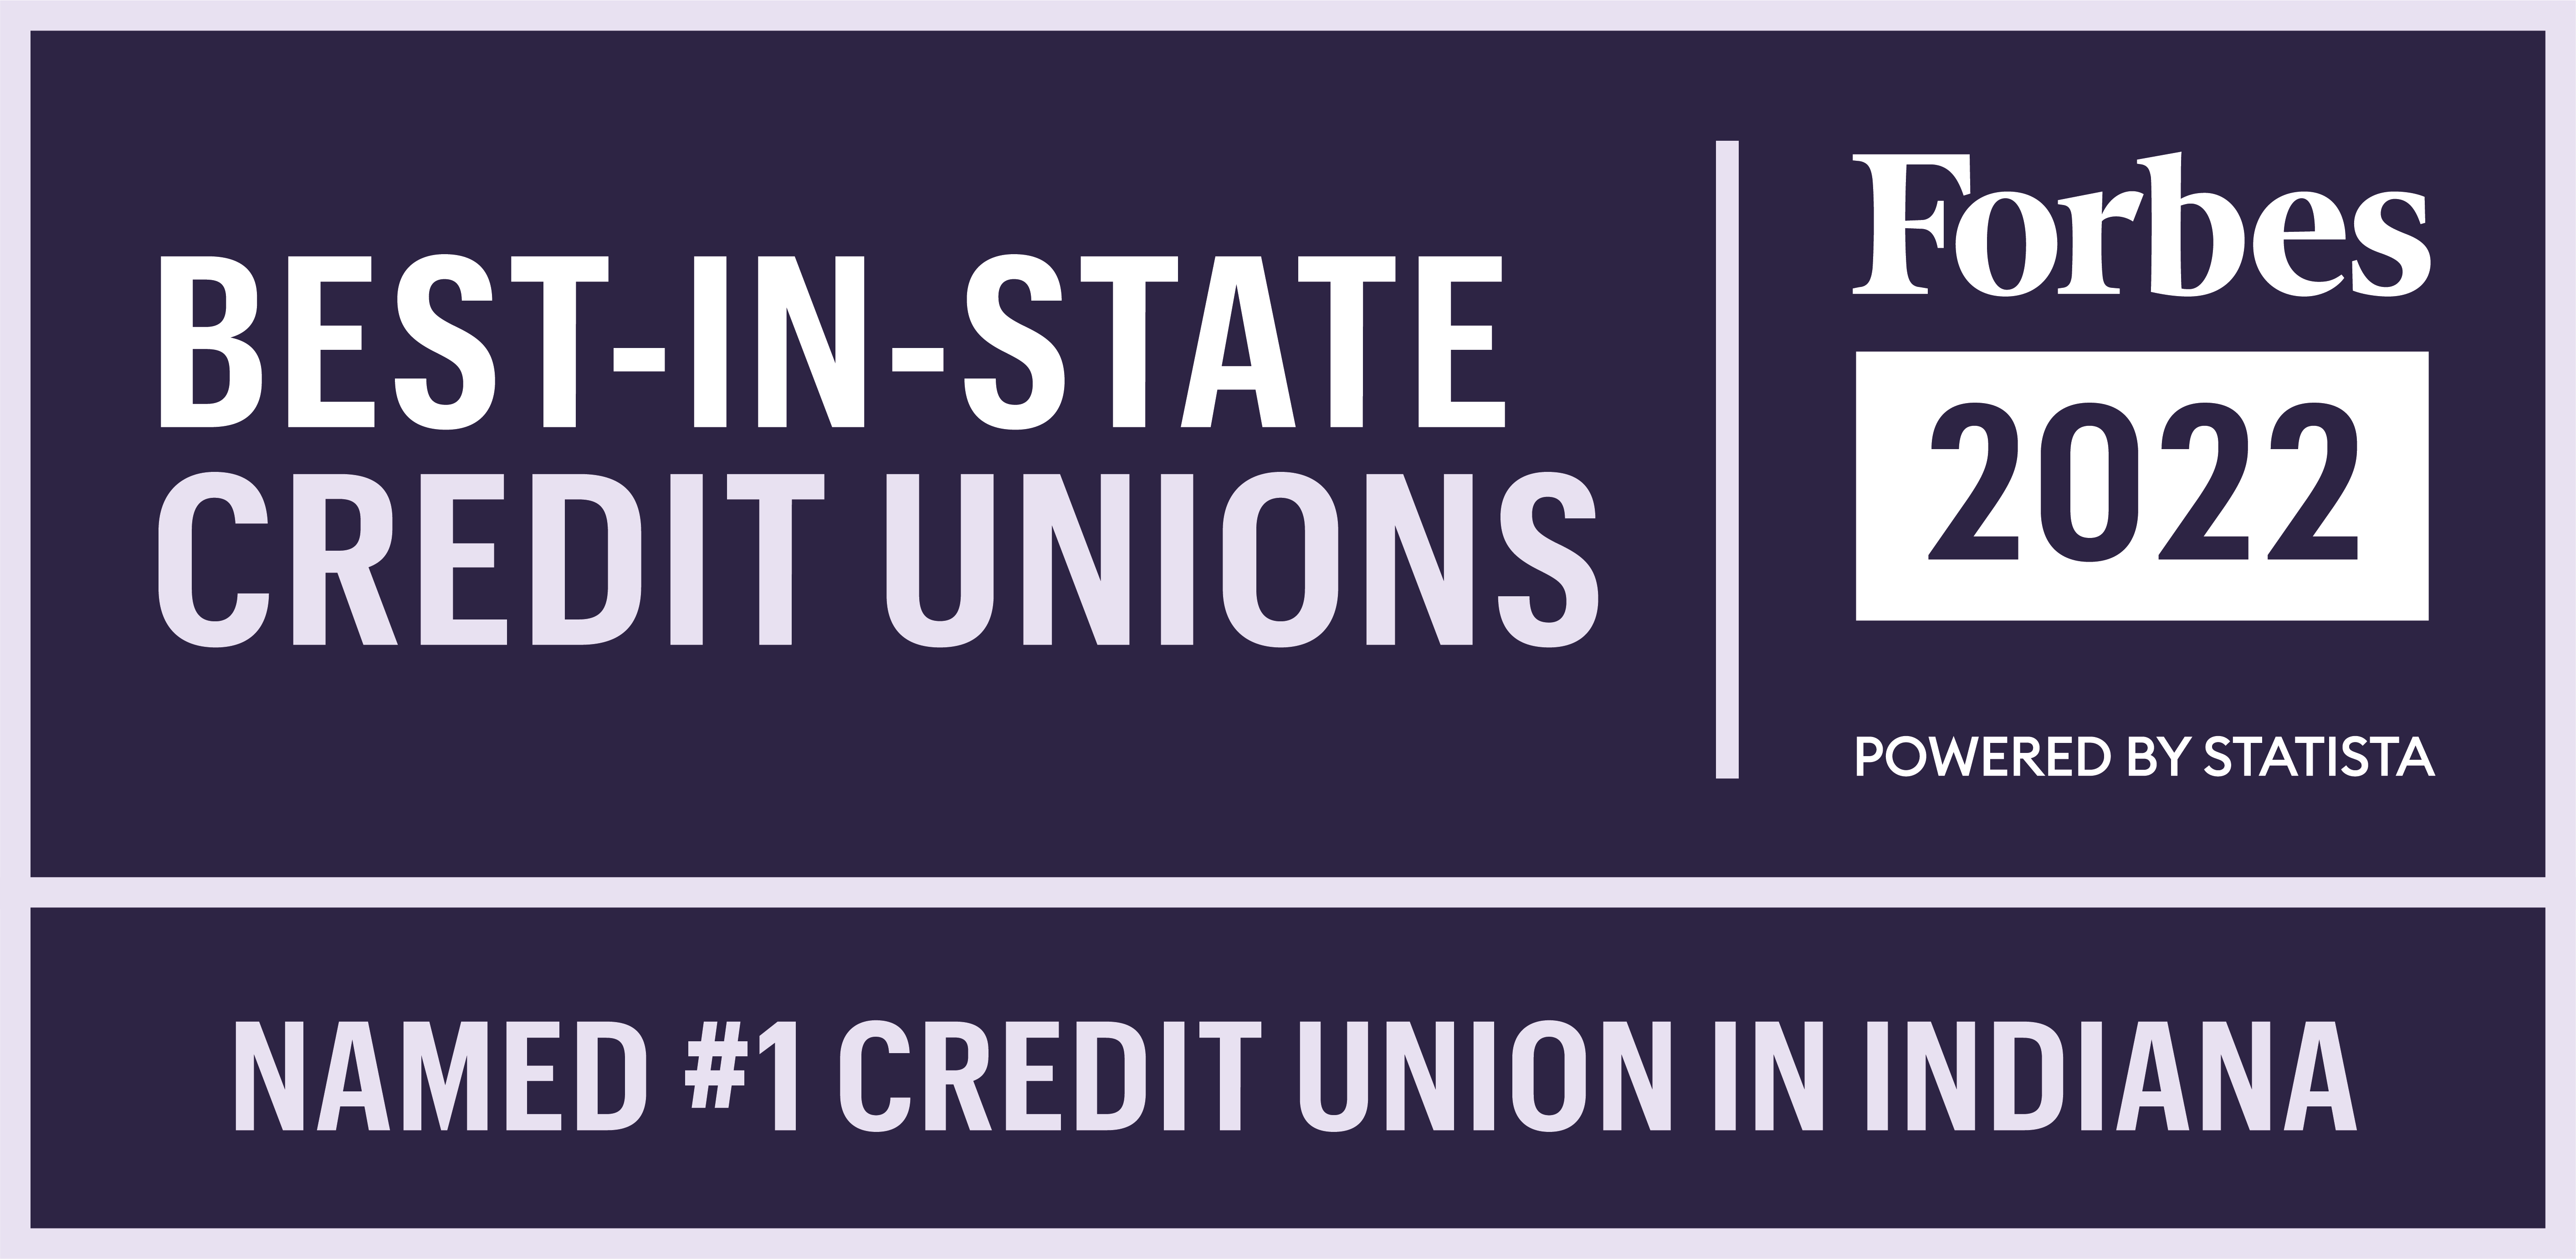 Forbes_BIS_Credit-Unions_2022_Logo_Rec-Color_-1Indiana-1.png